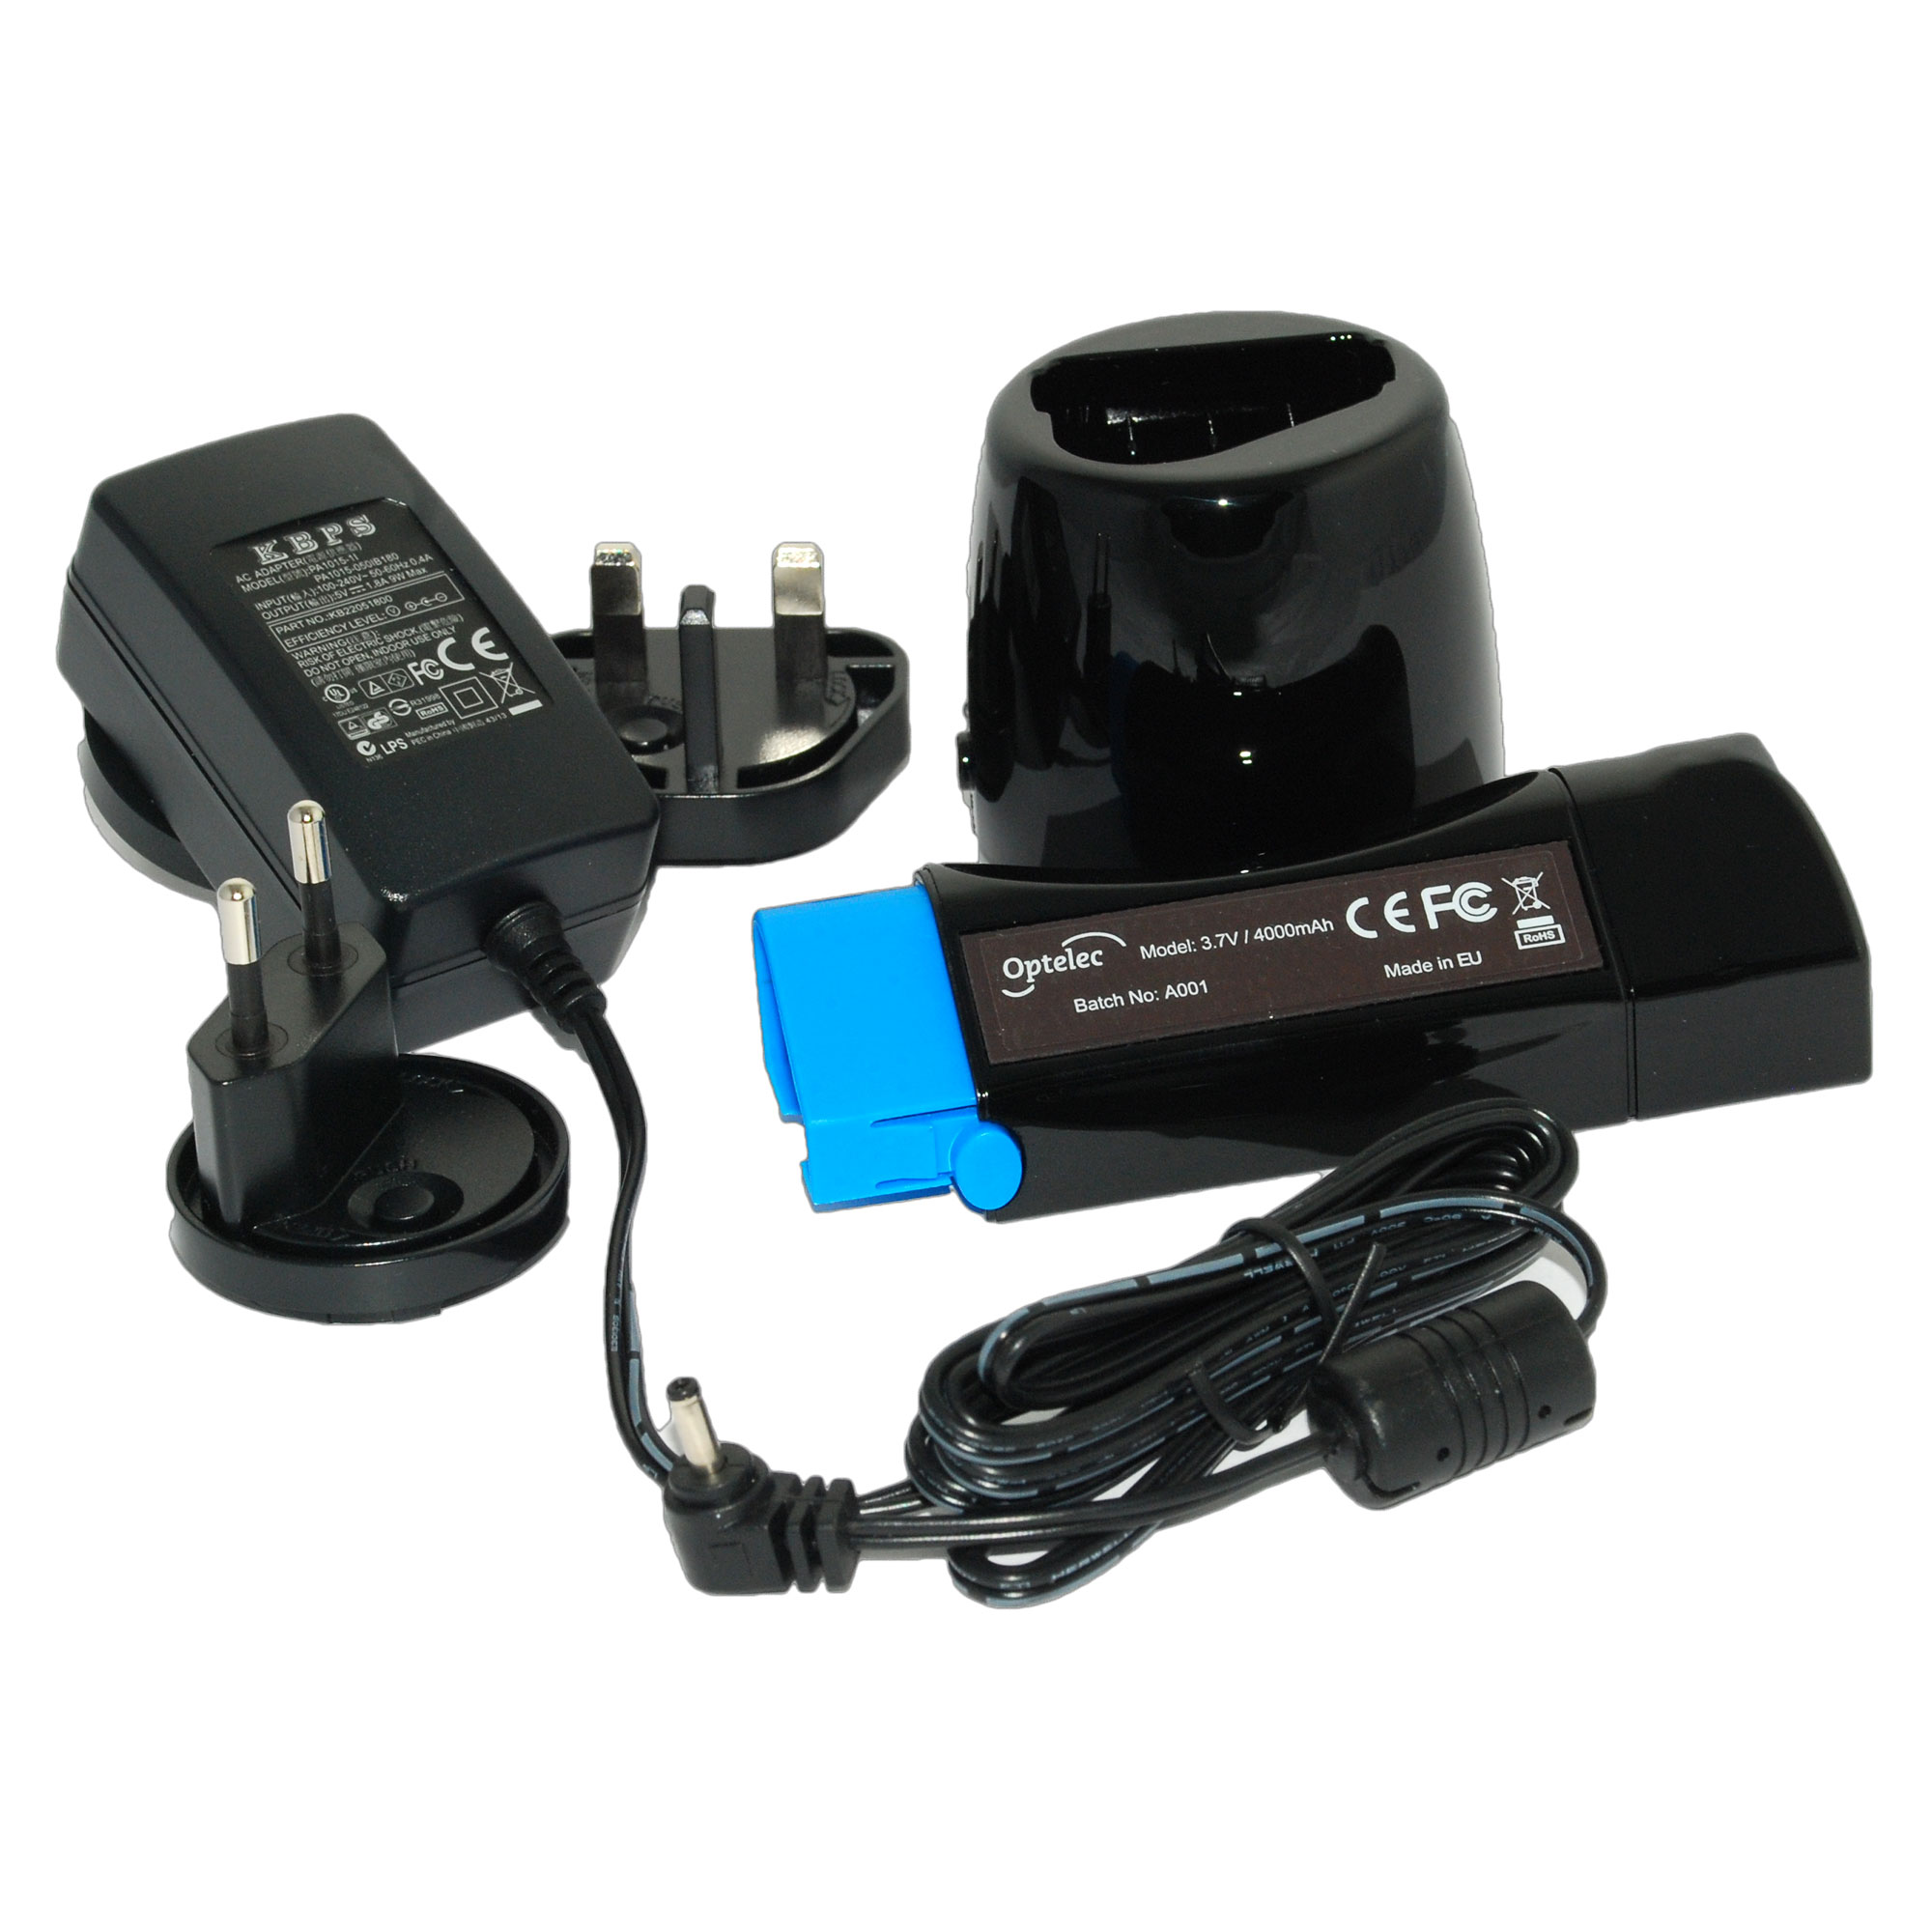 Optelec Compact Touch HD Charging Station with Battery Handle Assembly